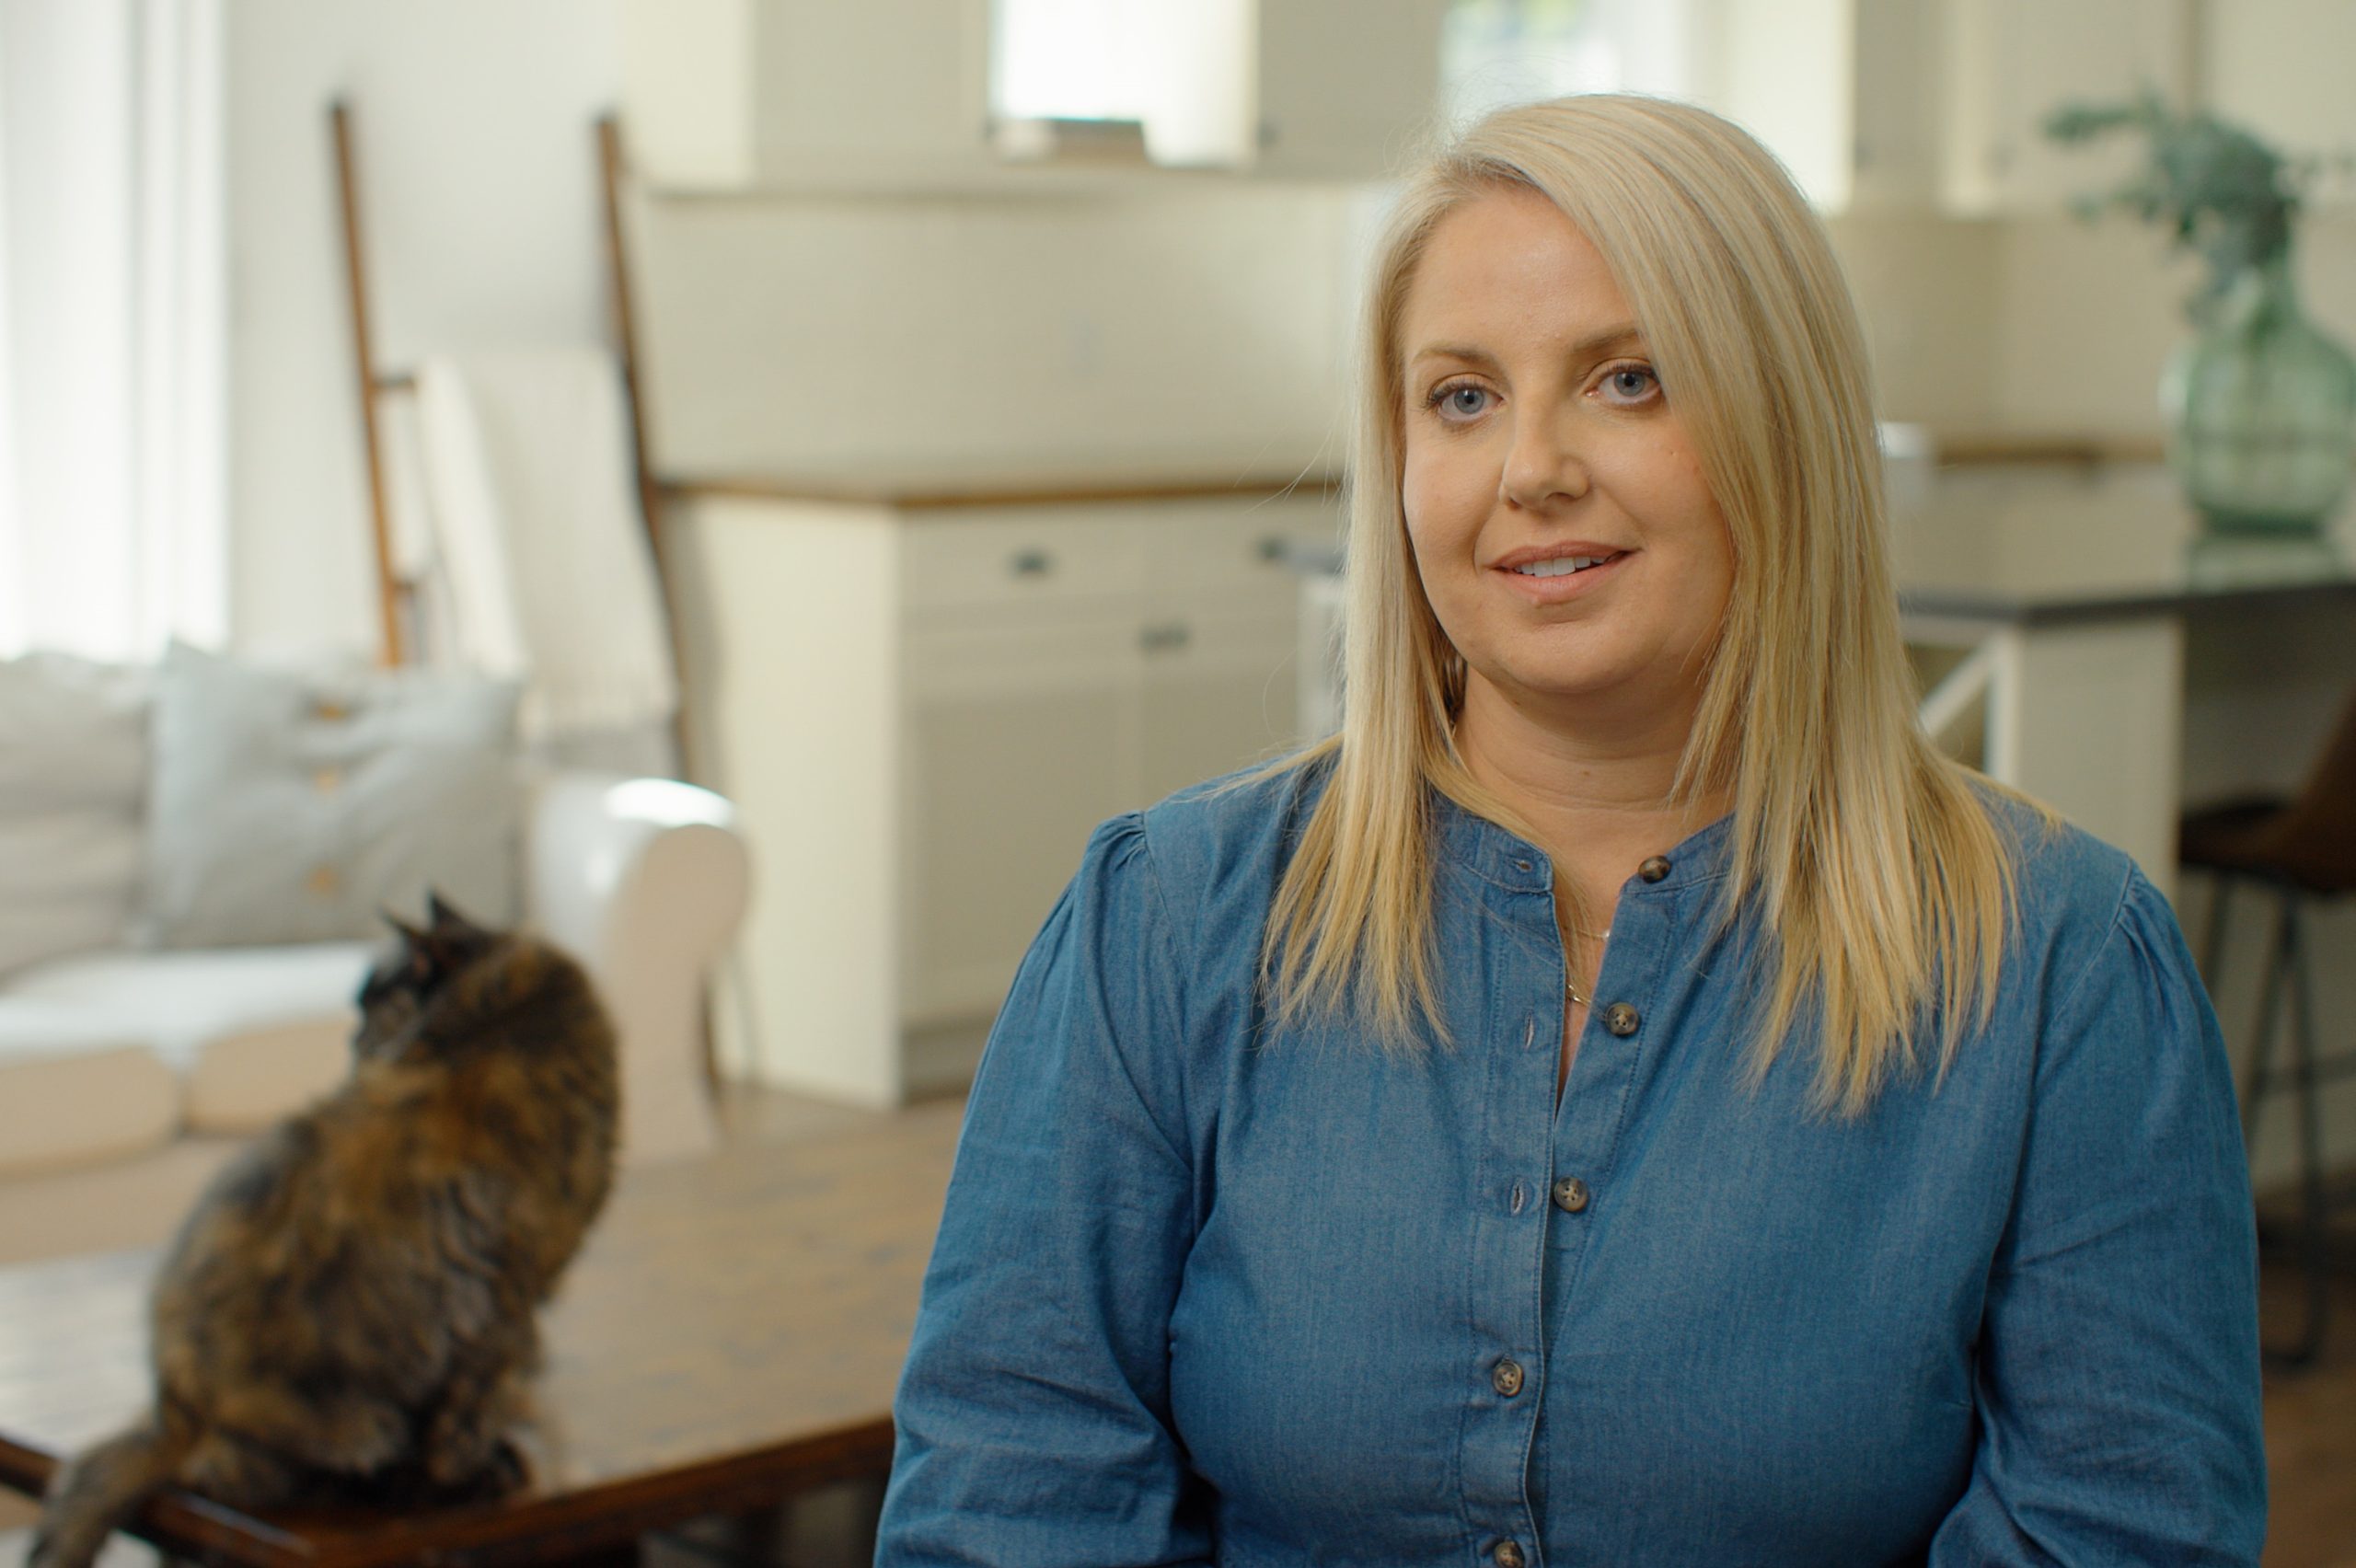 A blond women in a jean coloured top. A brown and red cat sits on the coffee table beside her.